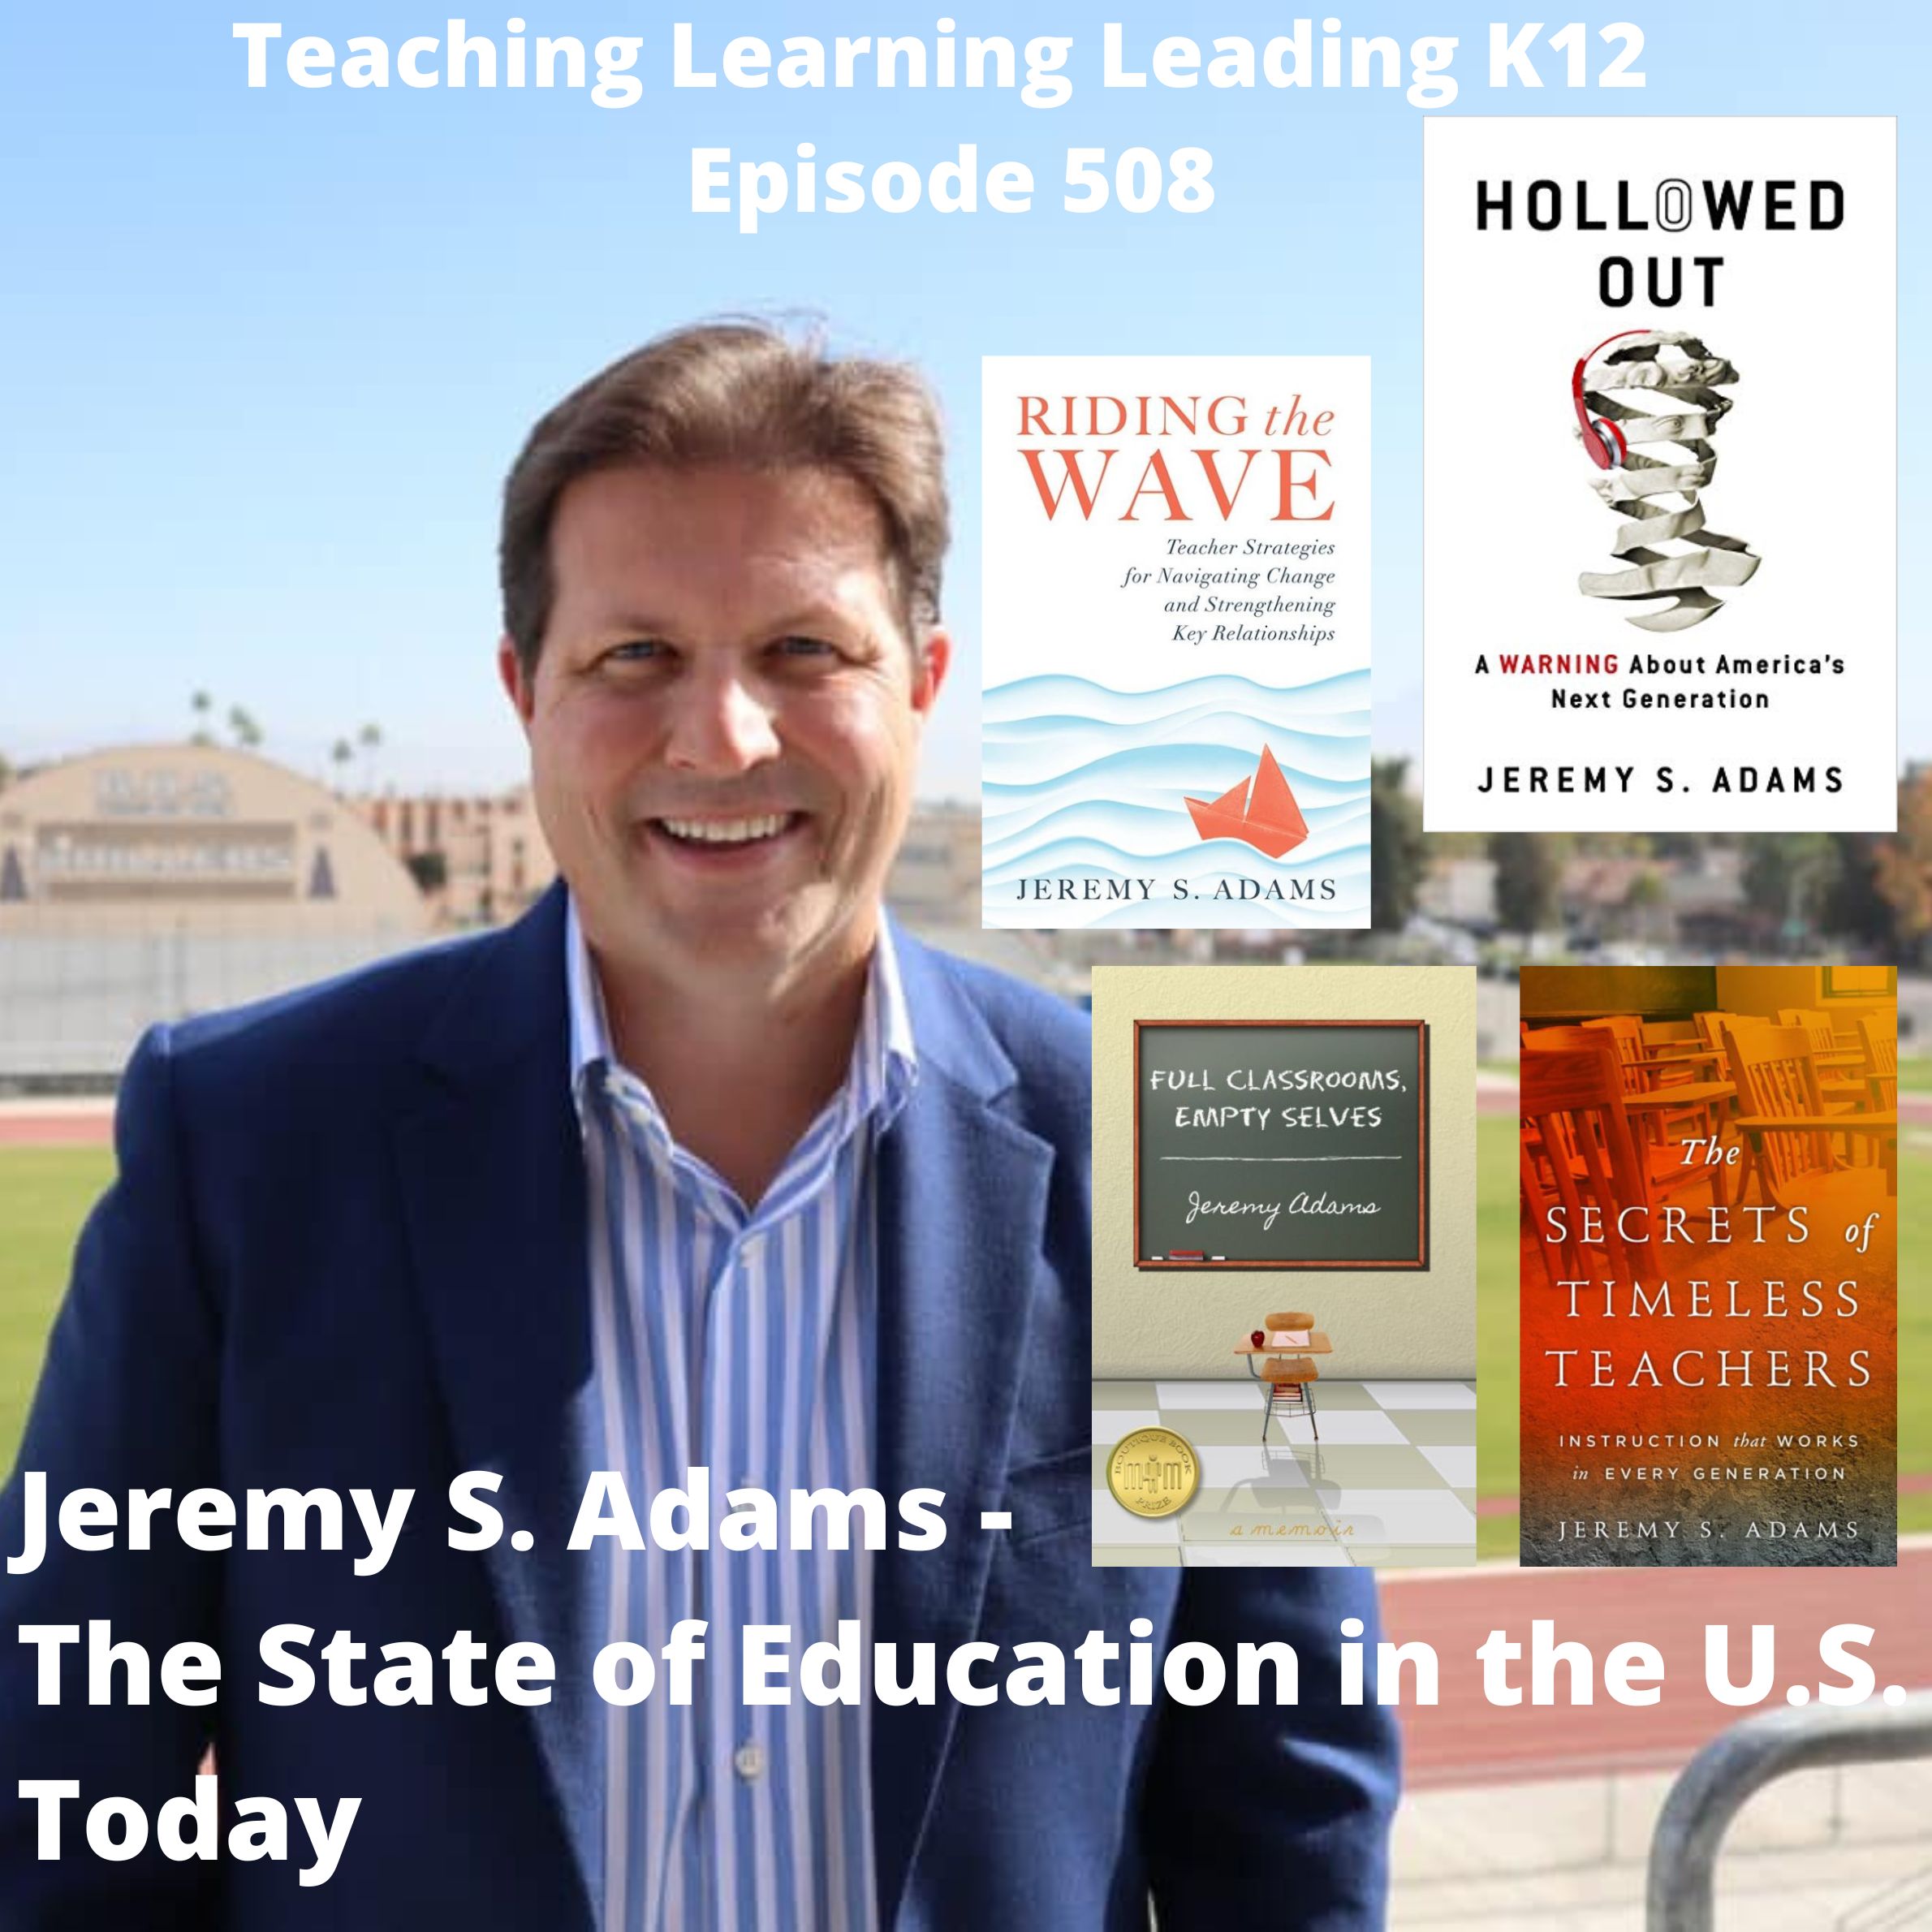 Jeremy S. Adams: The State of Education In the U.S. Today - 508 Image